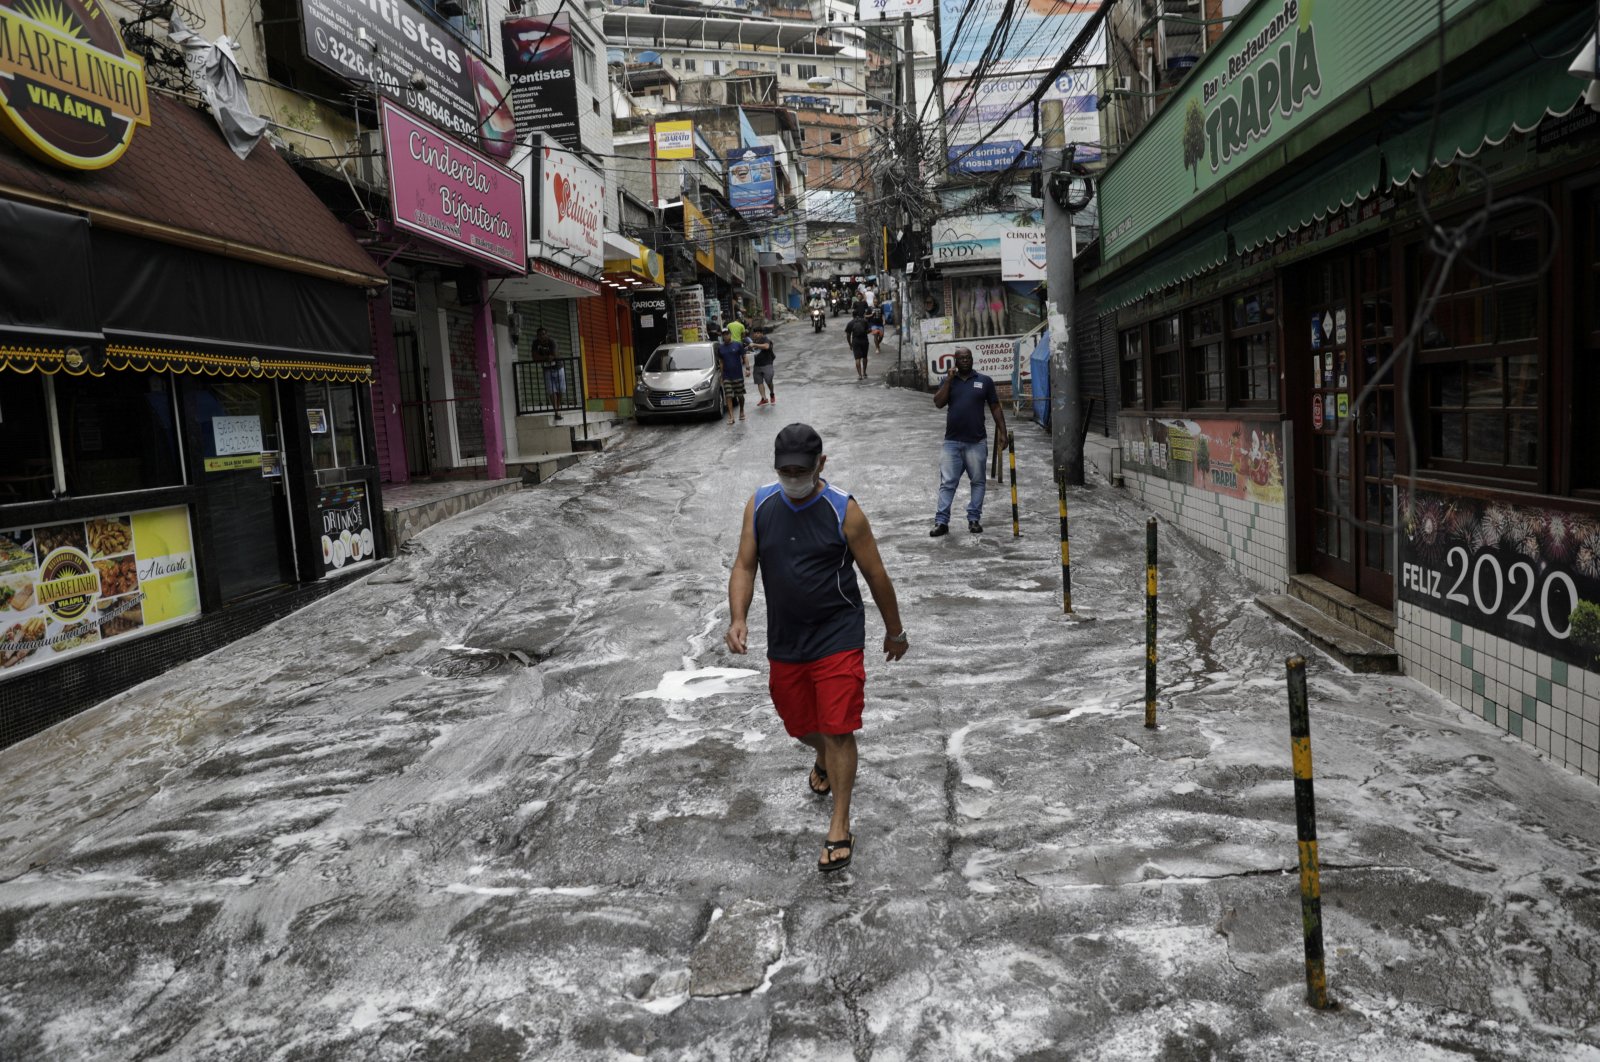 A man wearing a protective mask walks on a street disinfected by cleaners during the  COVID-19 outbreak, at the Rocinha slum in Rio de Janeiro, Brazil April 10, 2020. (REUTERS Photo)